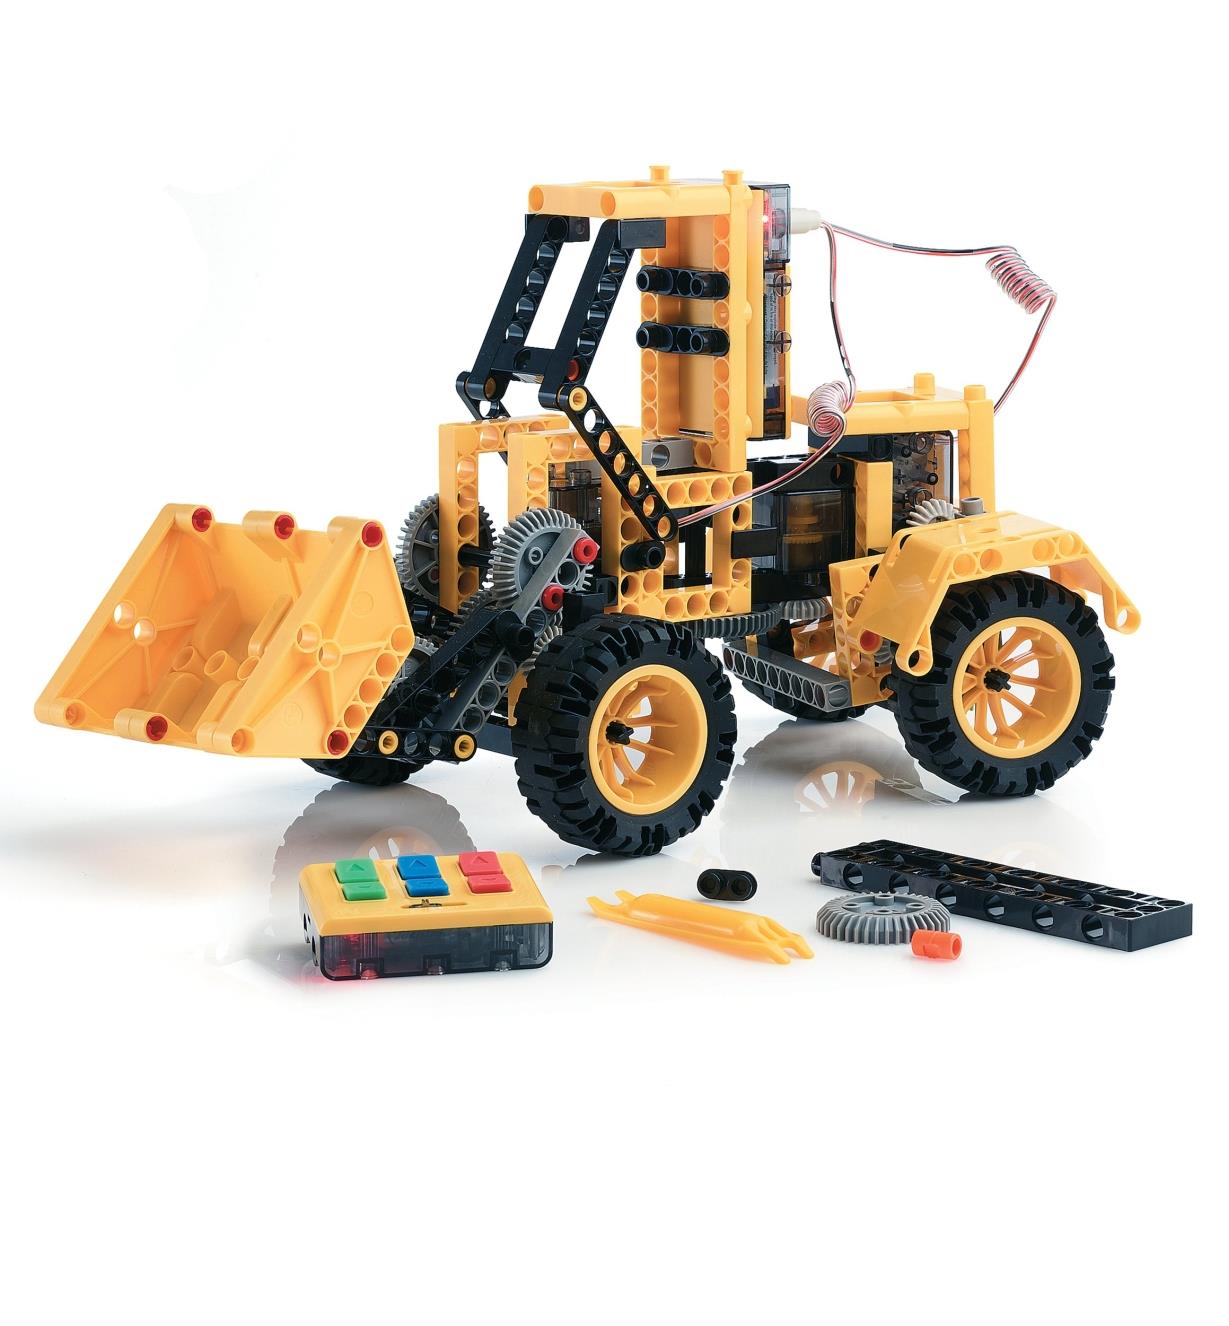 Completed bulldozer made with the Remote-Controlled Construction Vehicles Kit